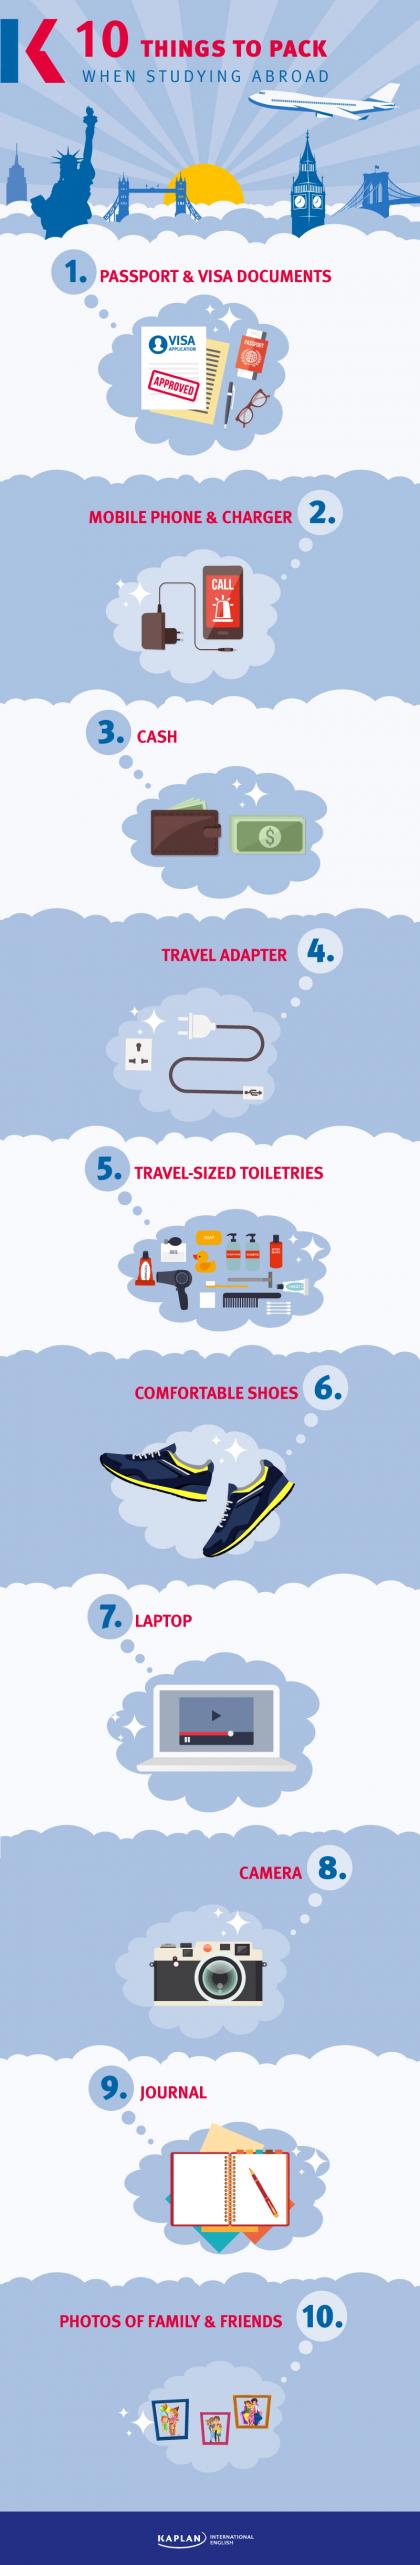 10 things to pack - infographic